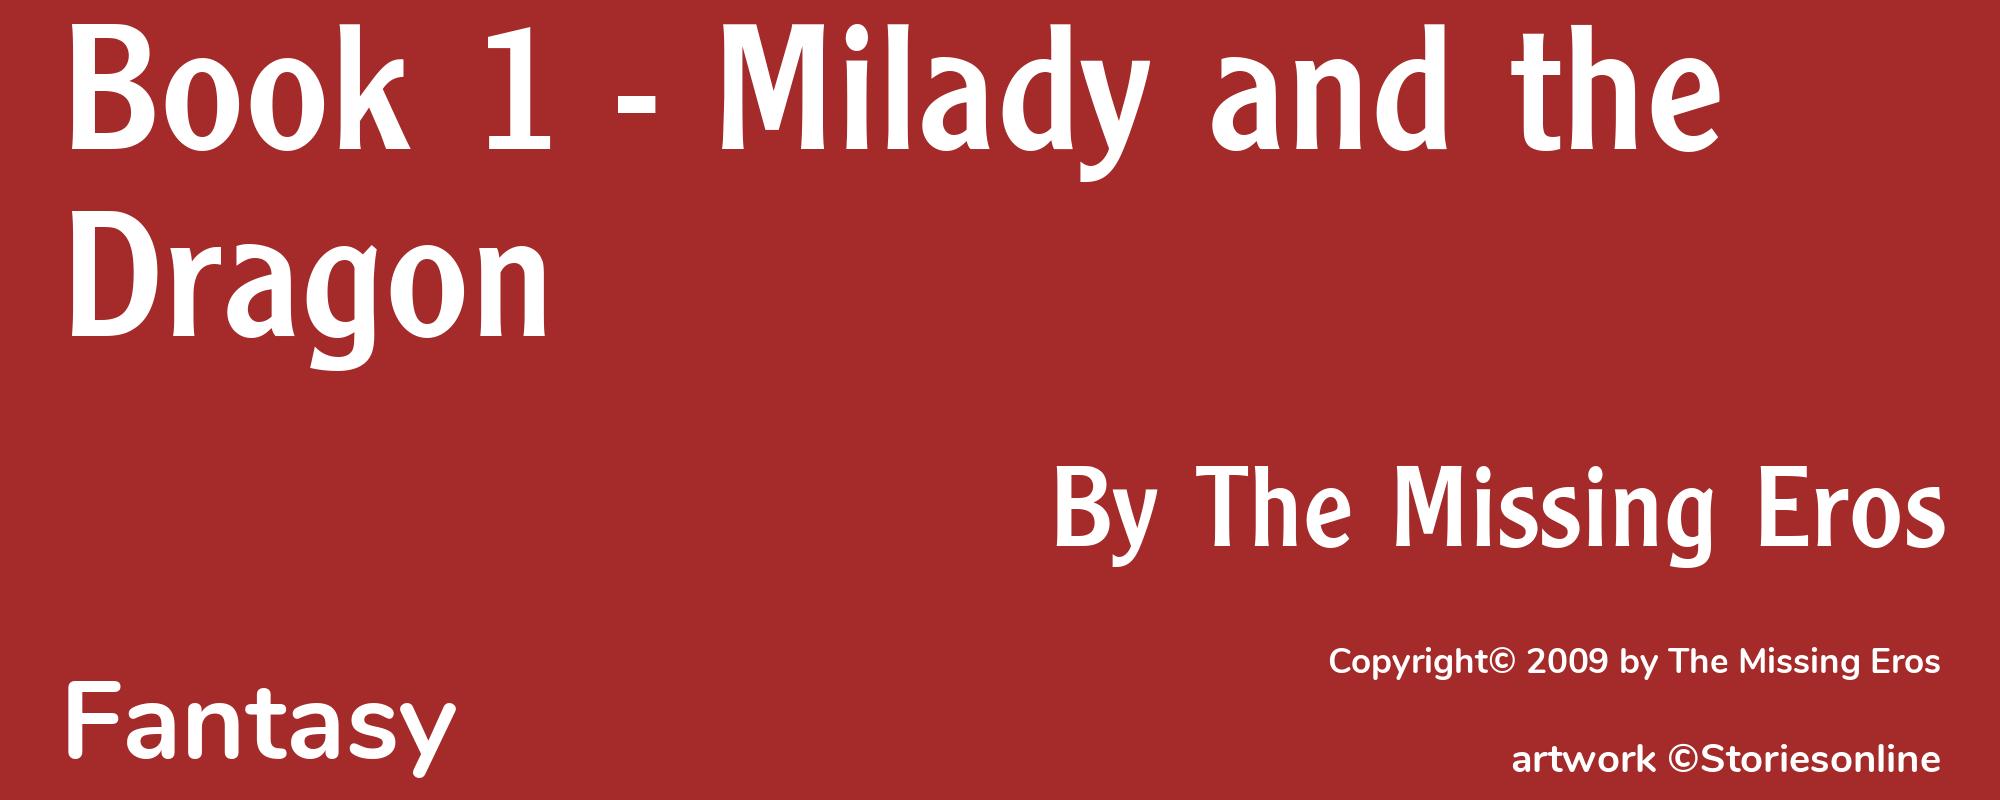 Book 1 - Milady and the Dragon - Cover